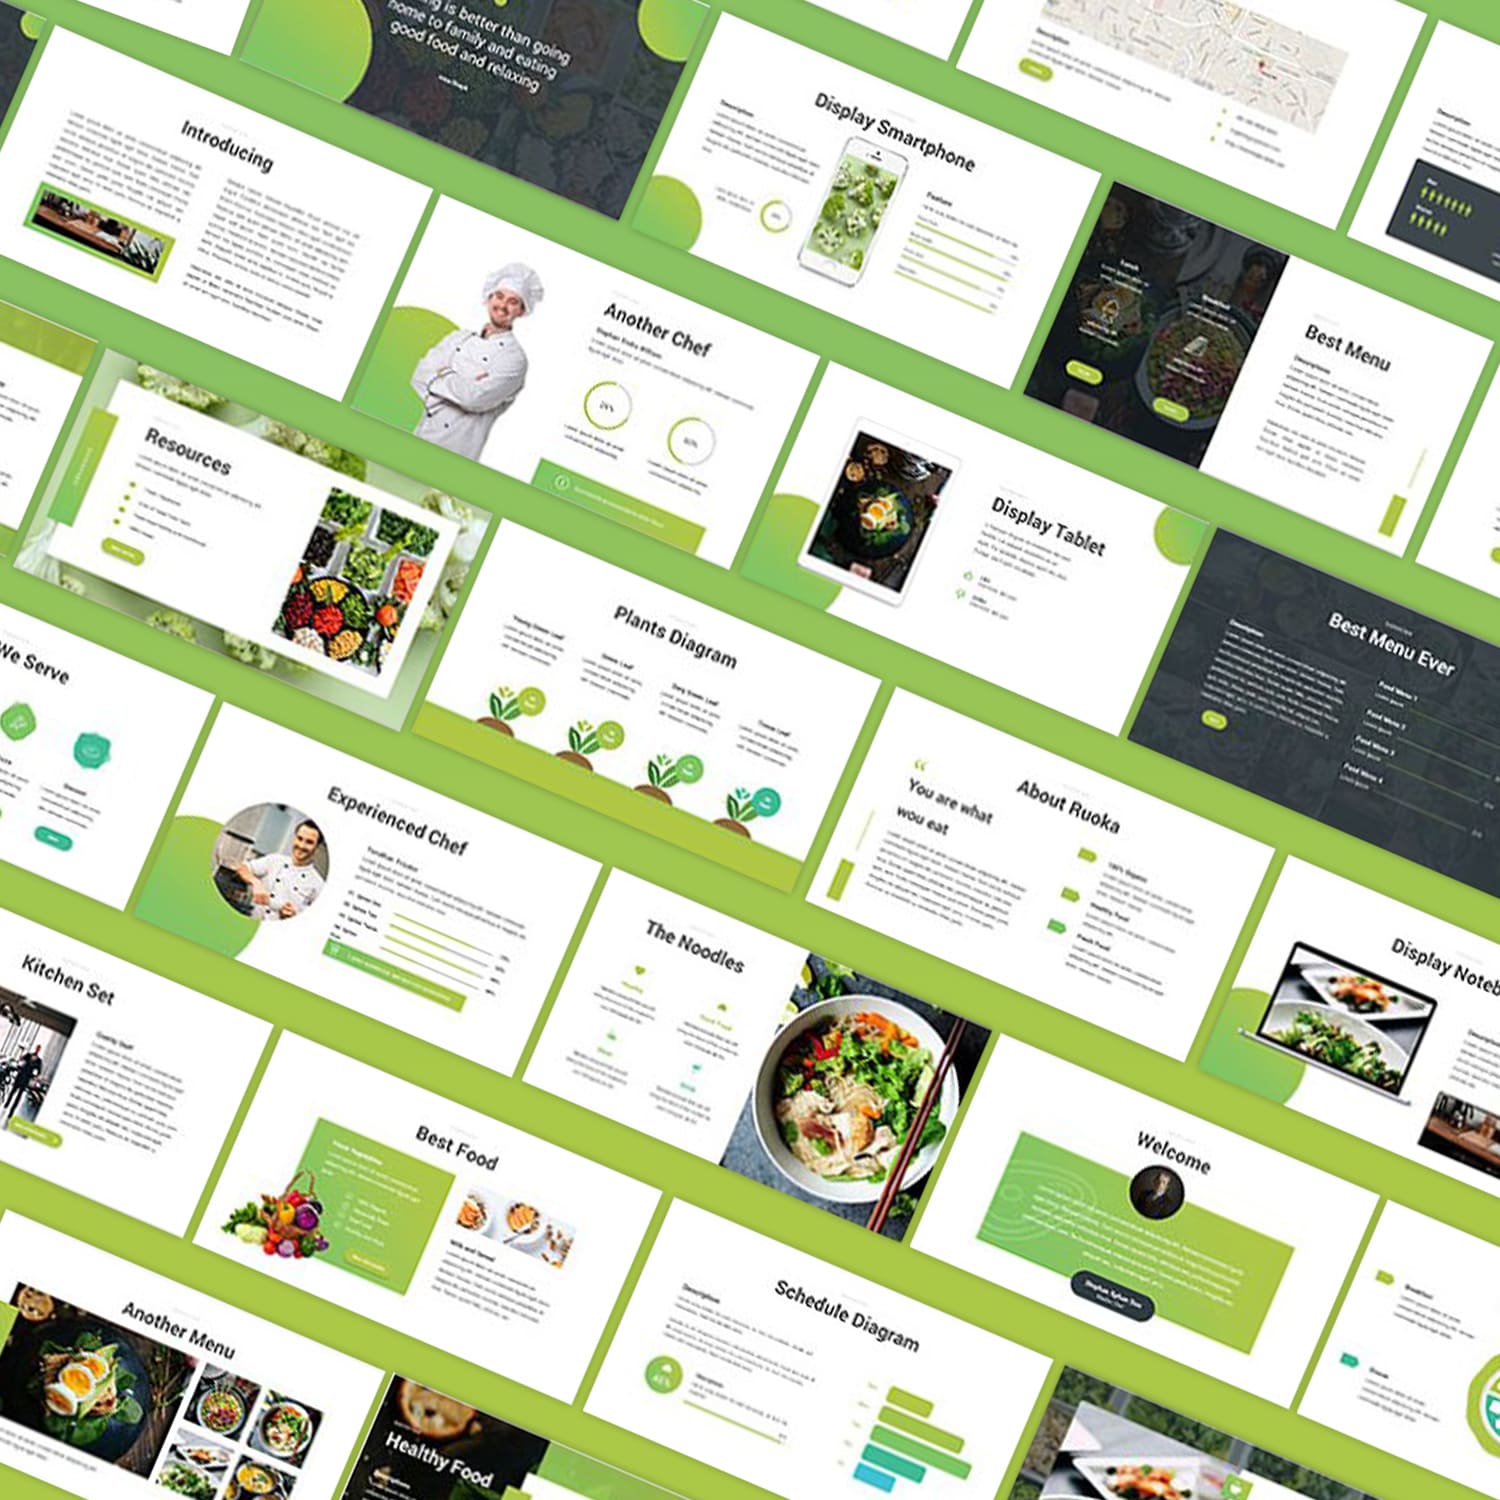 This is a multipurpose & creative powerpoint template.